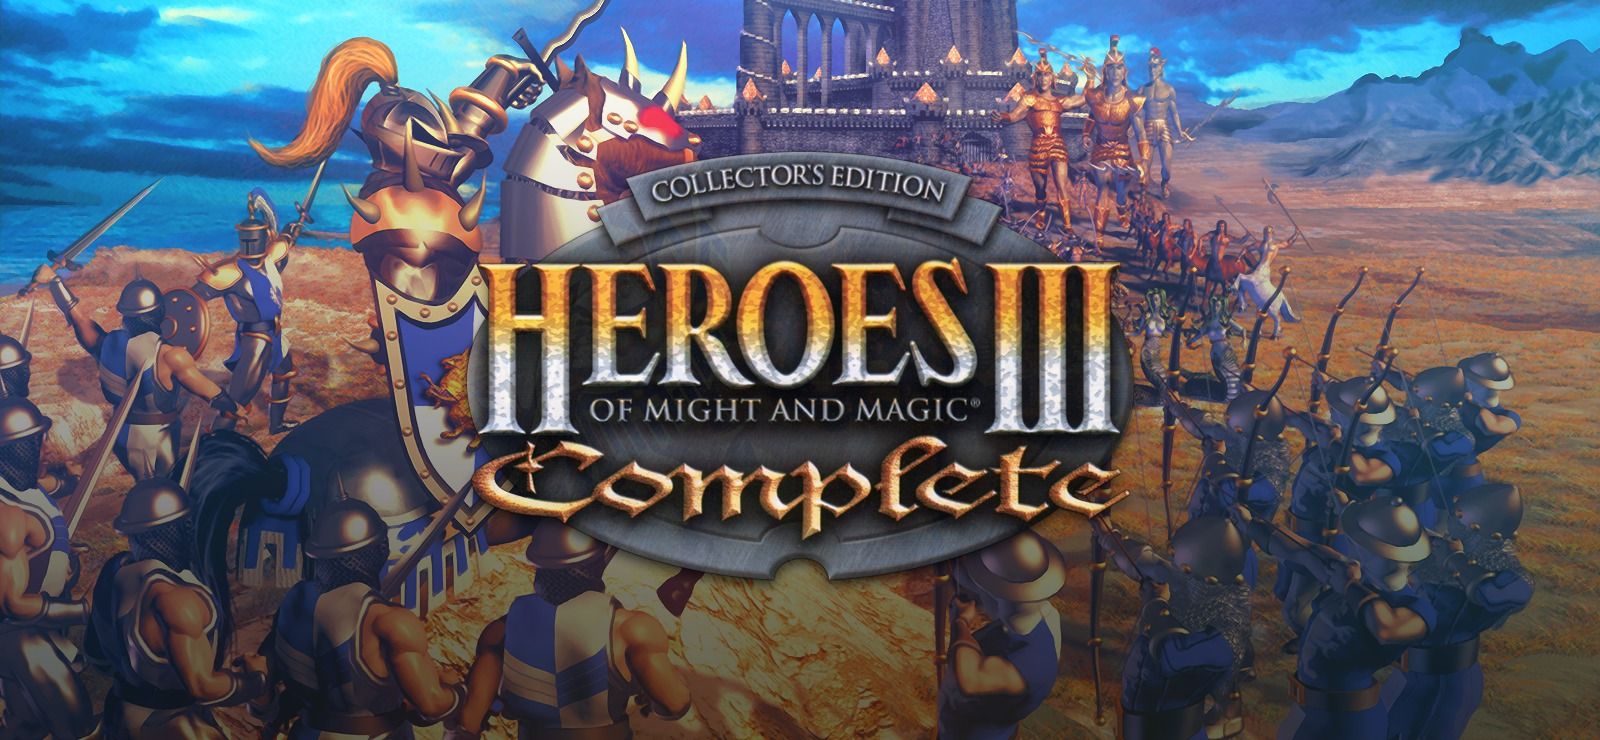 Heroes Of Might And Magic III wallpaper, Video Game, HQ Heroes Of Might And Magic III pictureK Wallpaper 2019